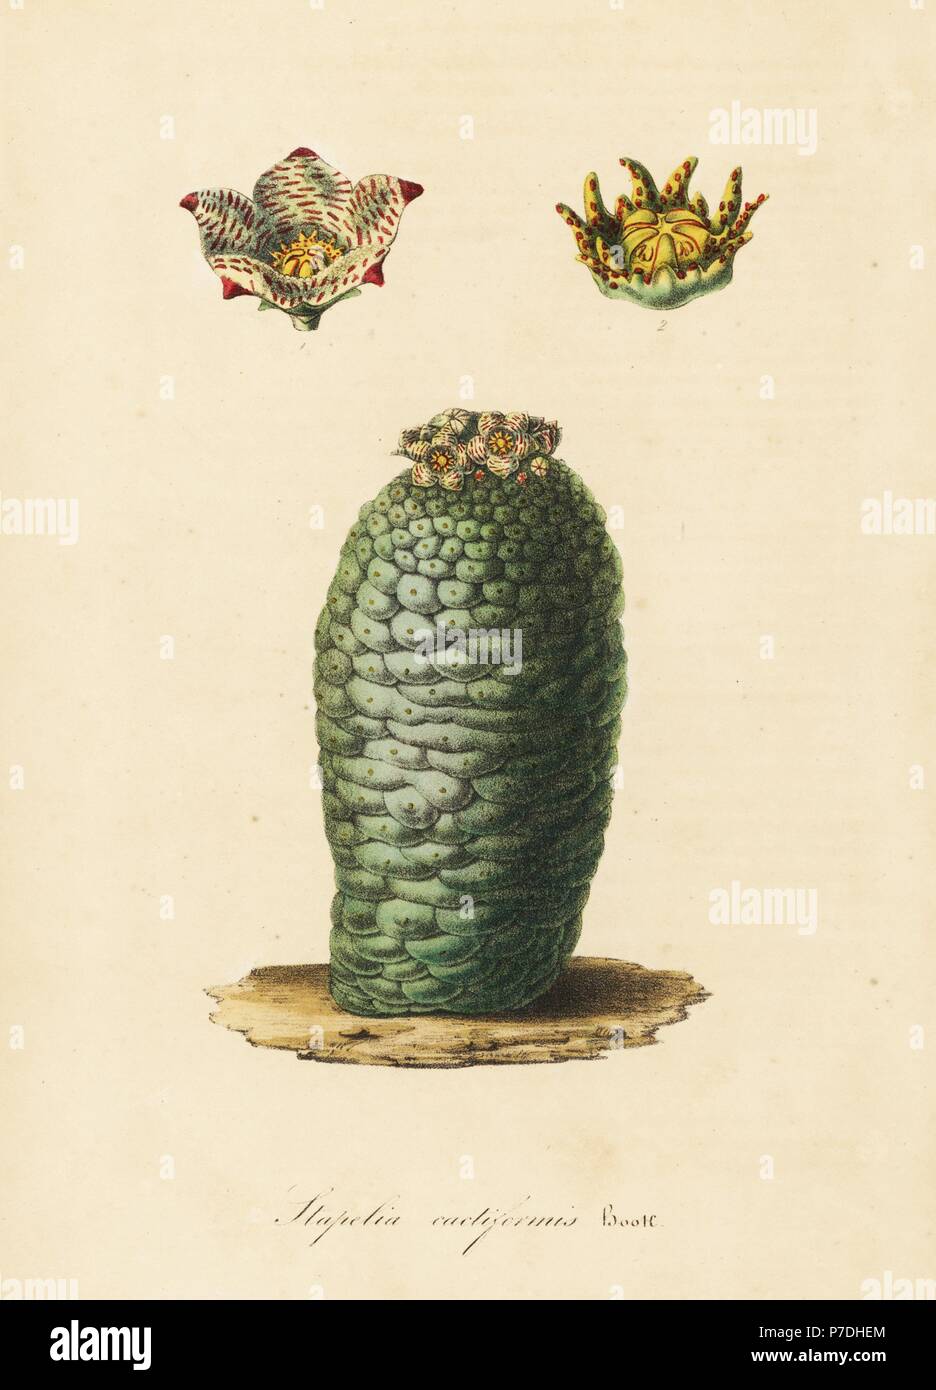 Lavrania cactiformis (Stapelia cactiformis). Handcoloured lithograph from Louis van Houtte and Charles Lemaire's Flowers of the Gardens and Hothouses of Europe, Flore des Serres et des Jardins de l'Europe, Ghent, Belgium, 1845. Stock Photo